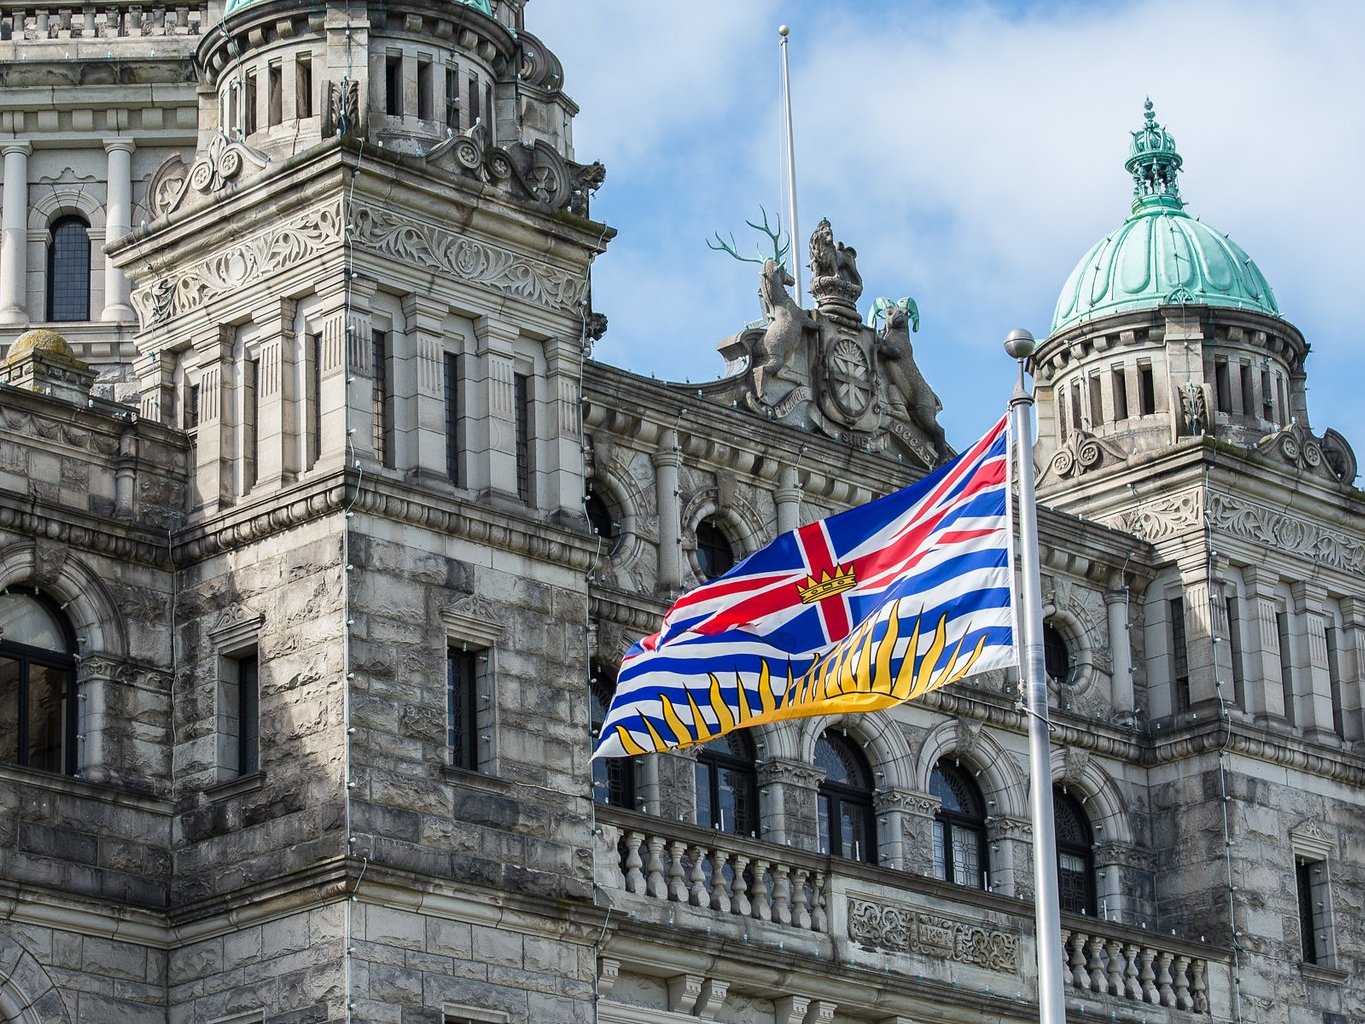 A BC flag flies in front of the stone legislature building.